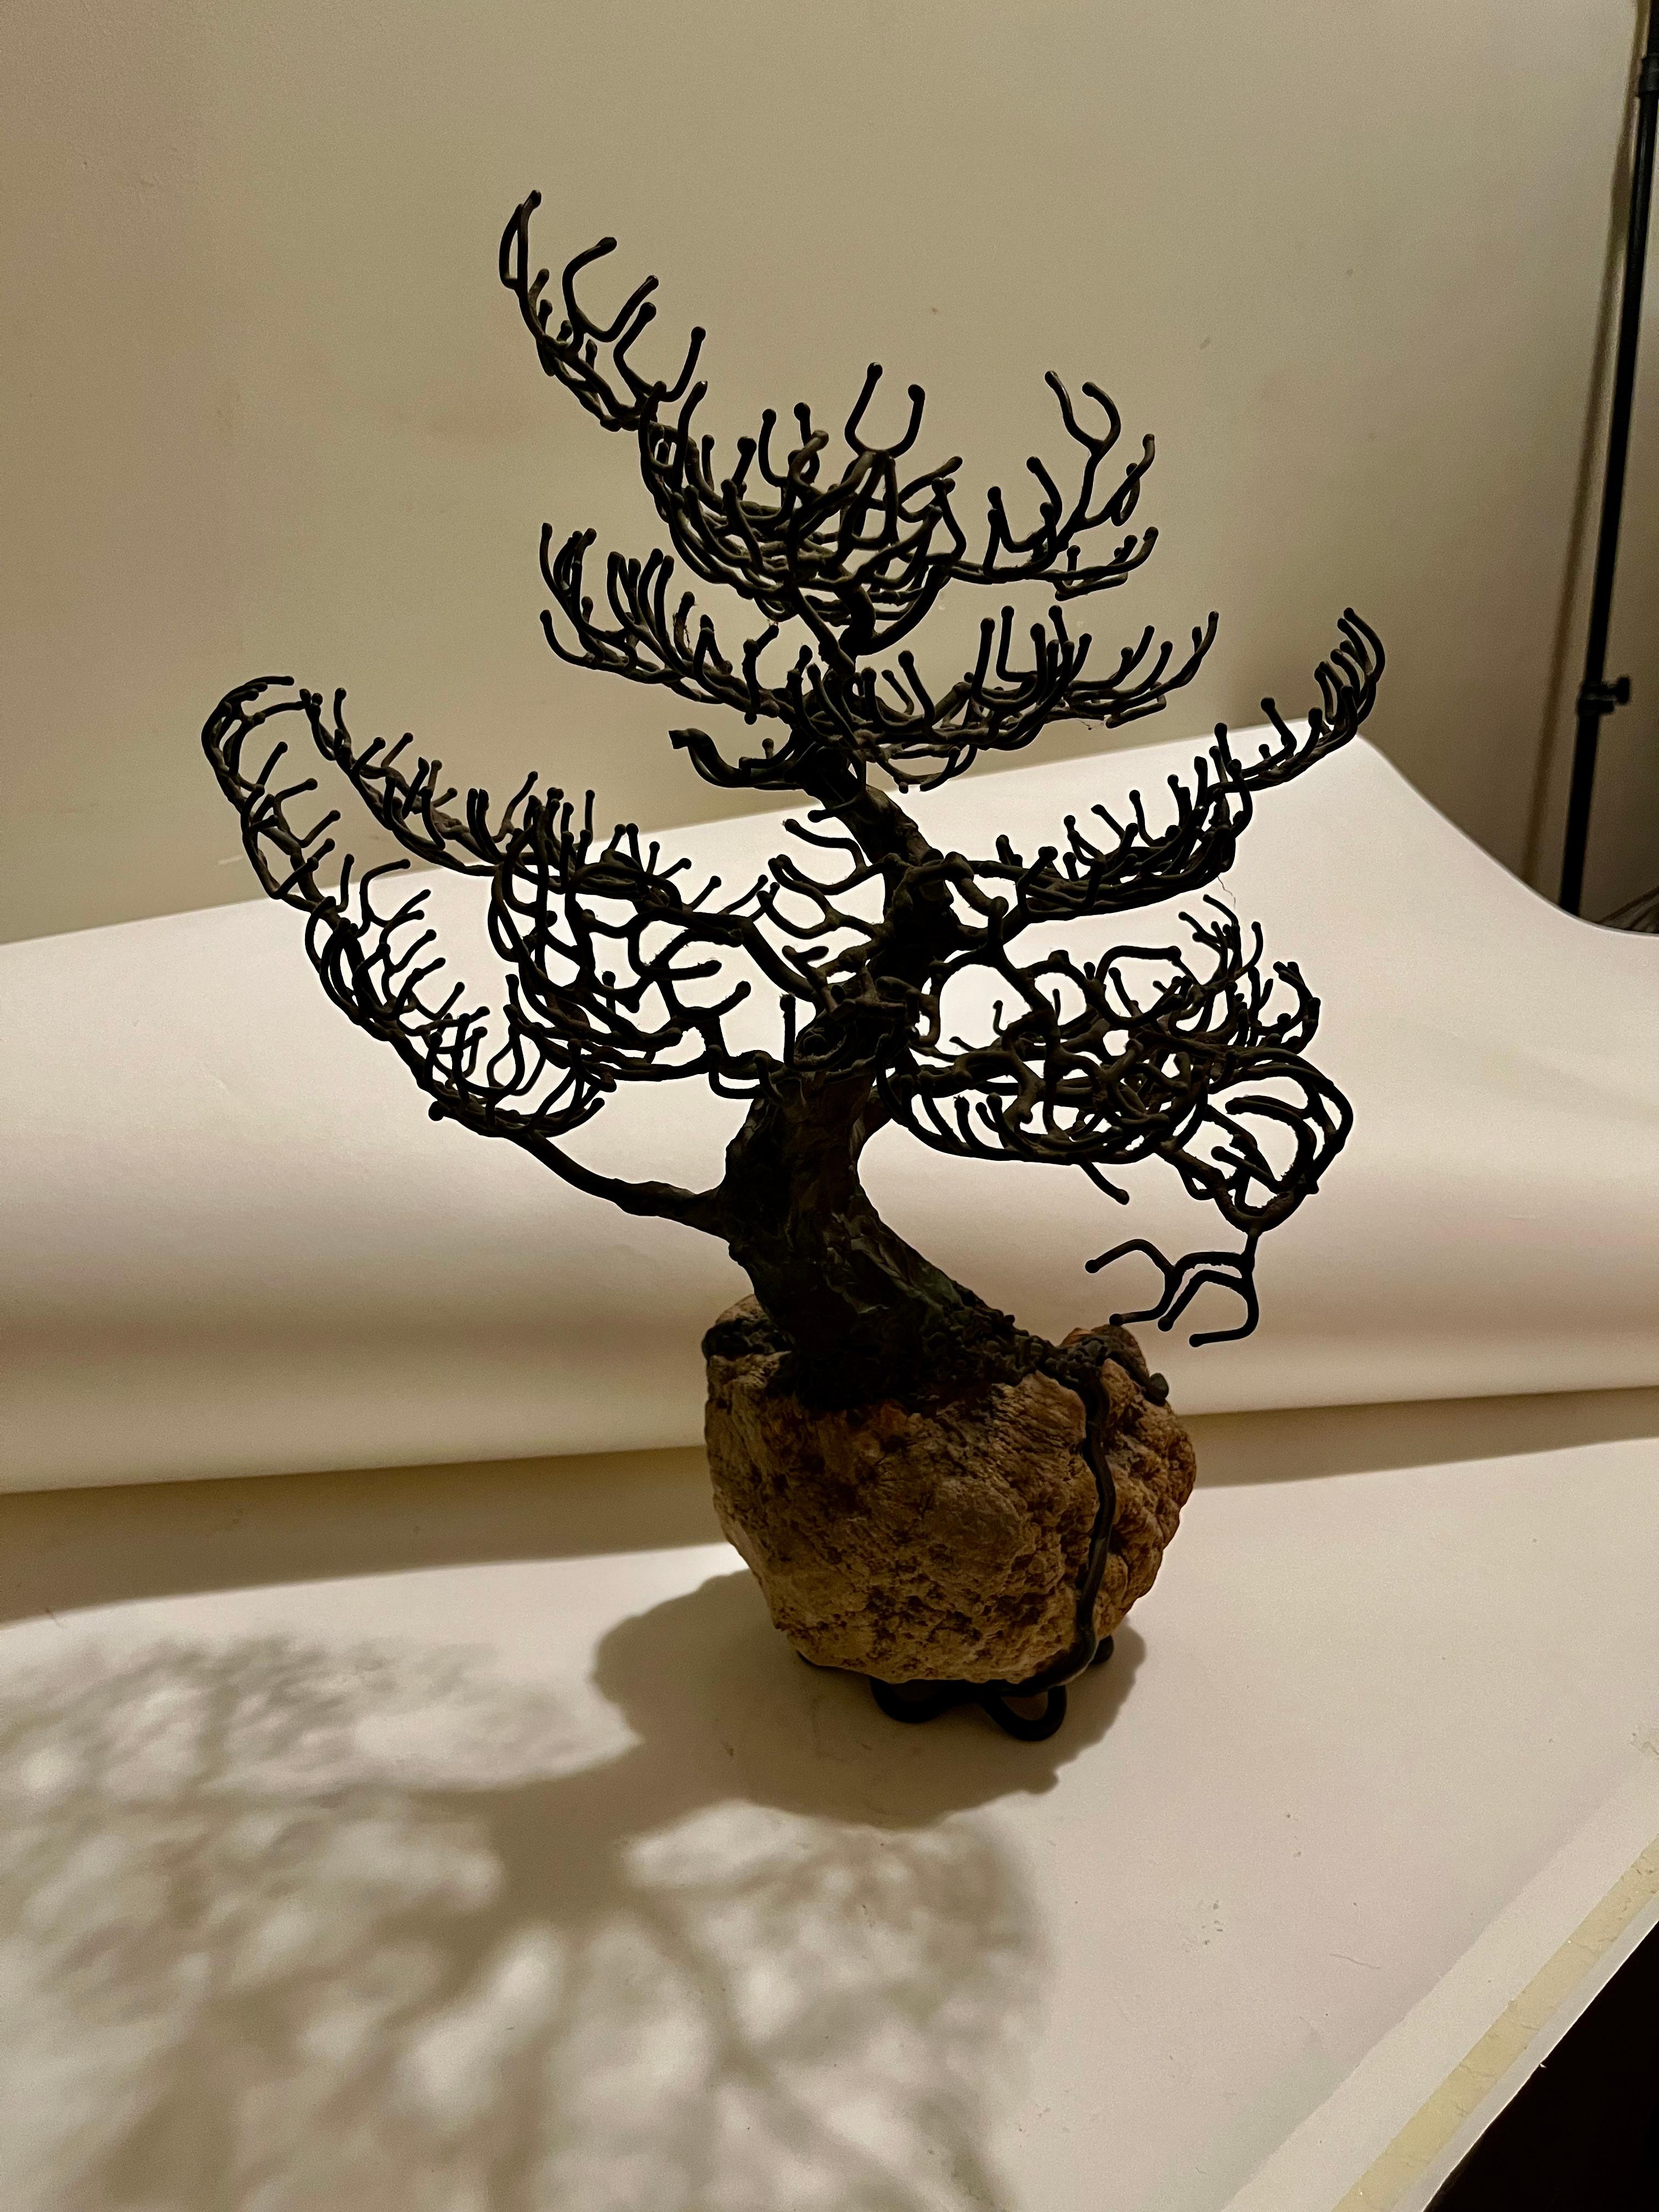 Mid-20th Century intricate and realistic bronze tree sculpture by Silva Bucci. Bronze nameplate accompanies the sculpture.